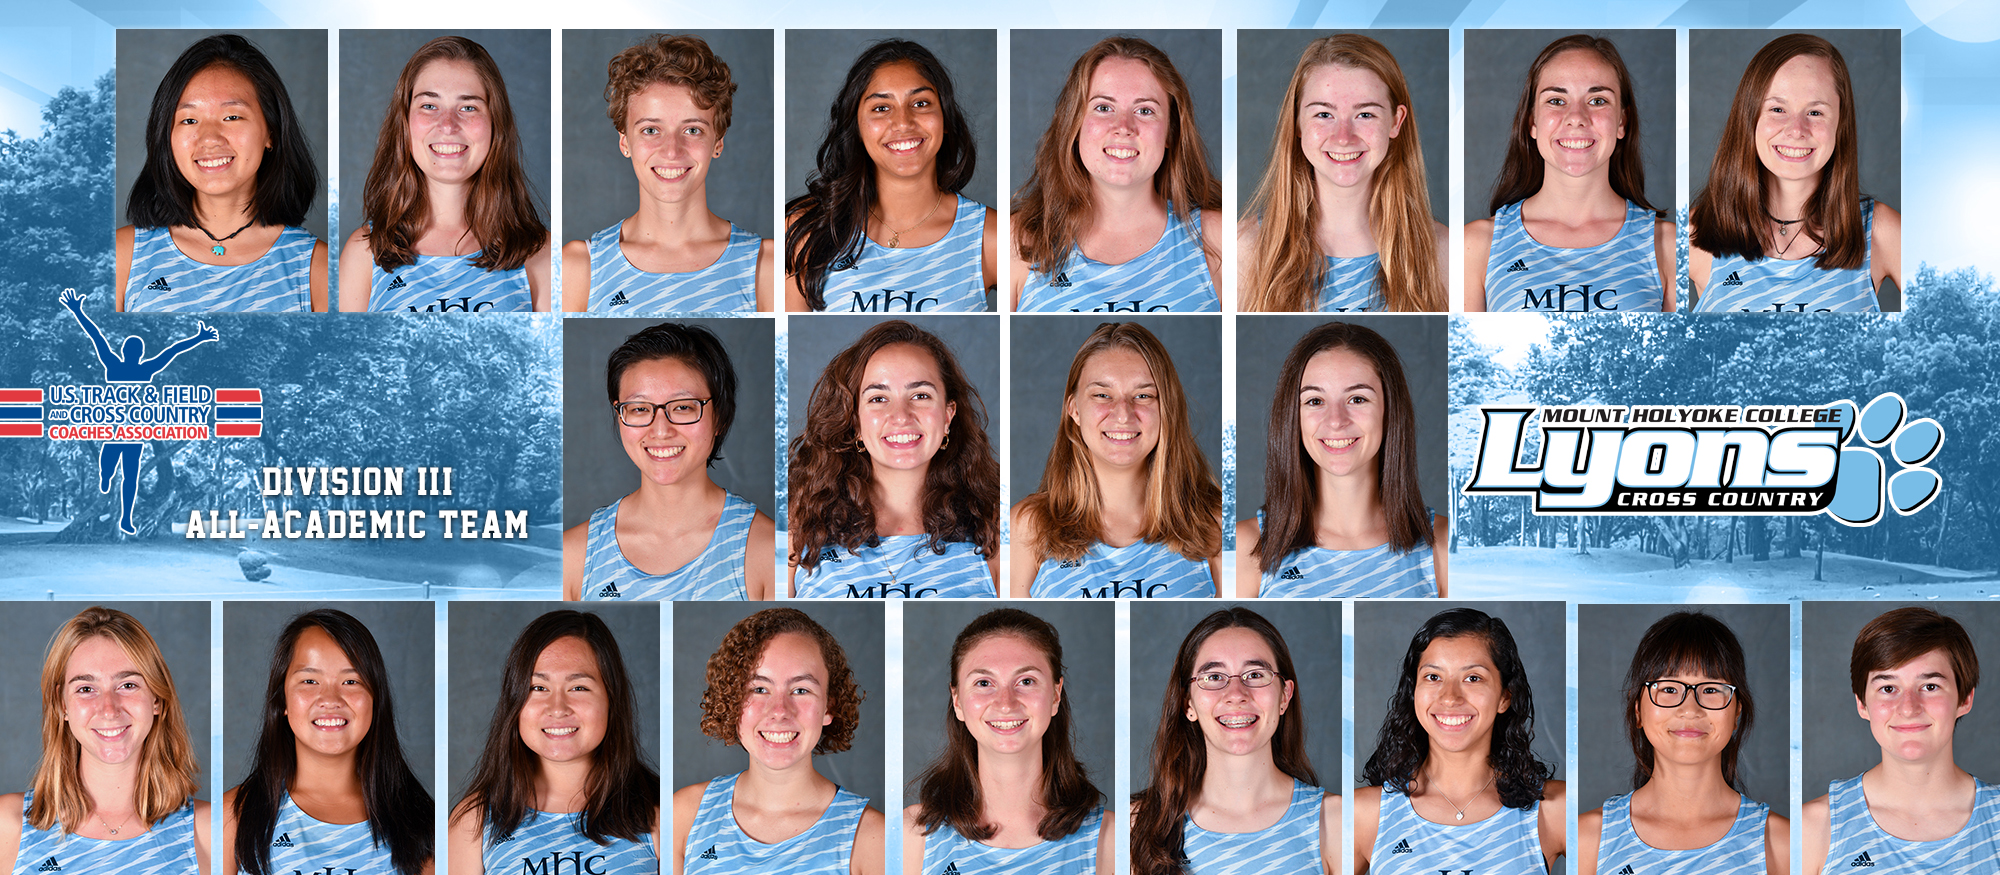 Graphic depicting all 22 student-athletes from the 2018 Lyons cross country team which was named a USTFCCCA Division III All-Academic Team on February 14, 2019.